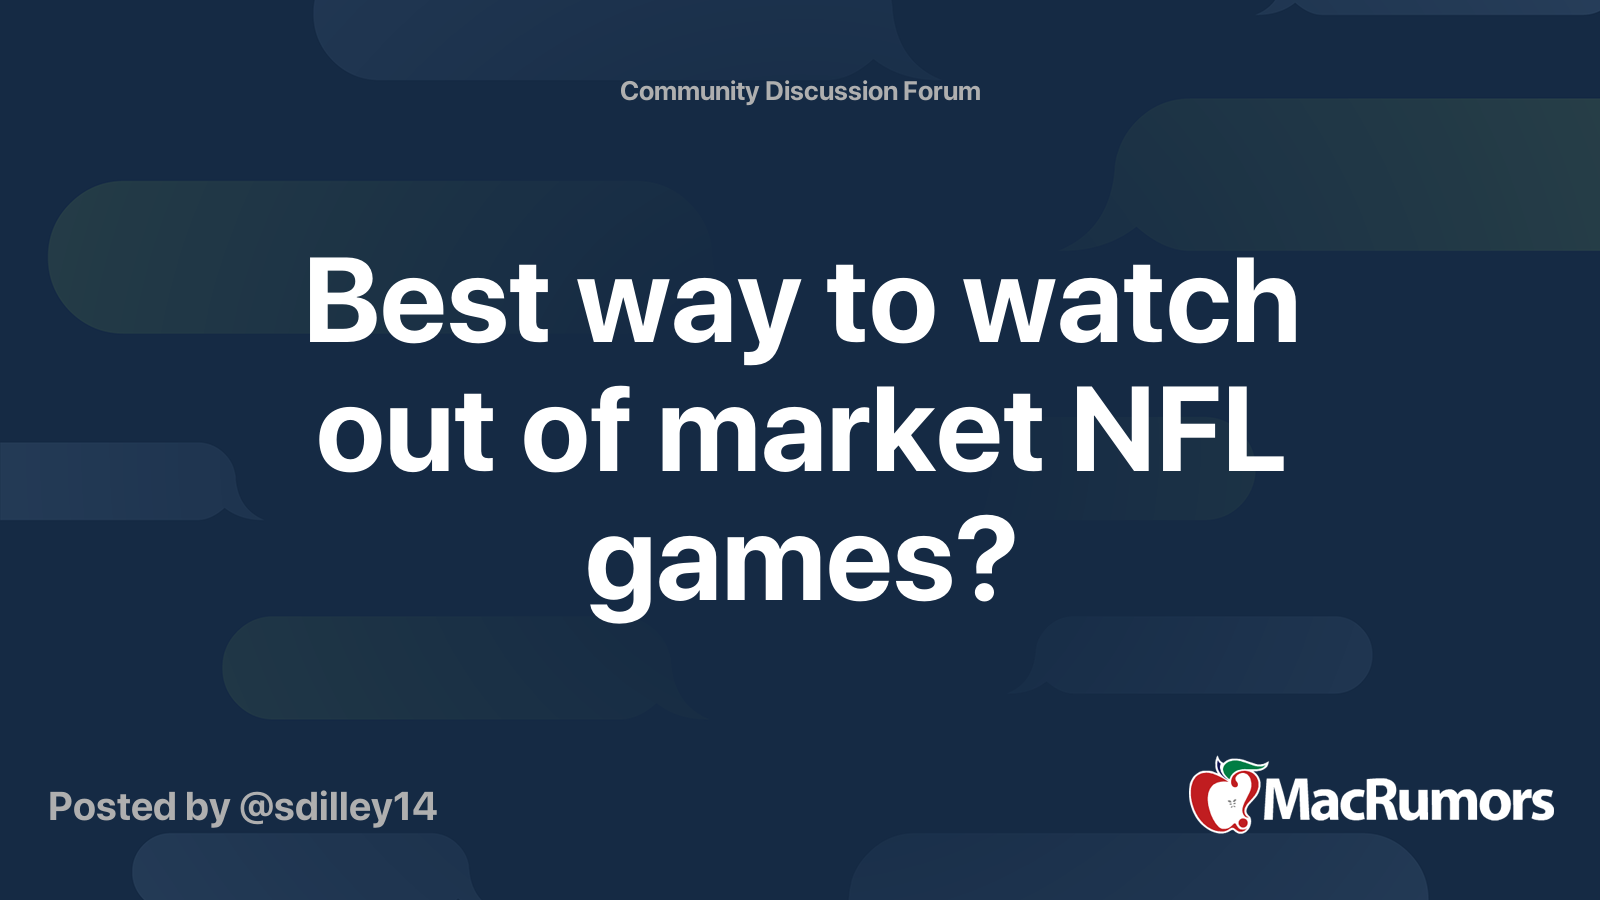 Best way to watch out of market NFL games?